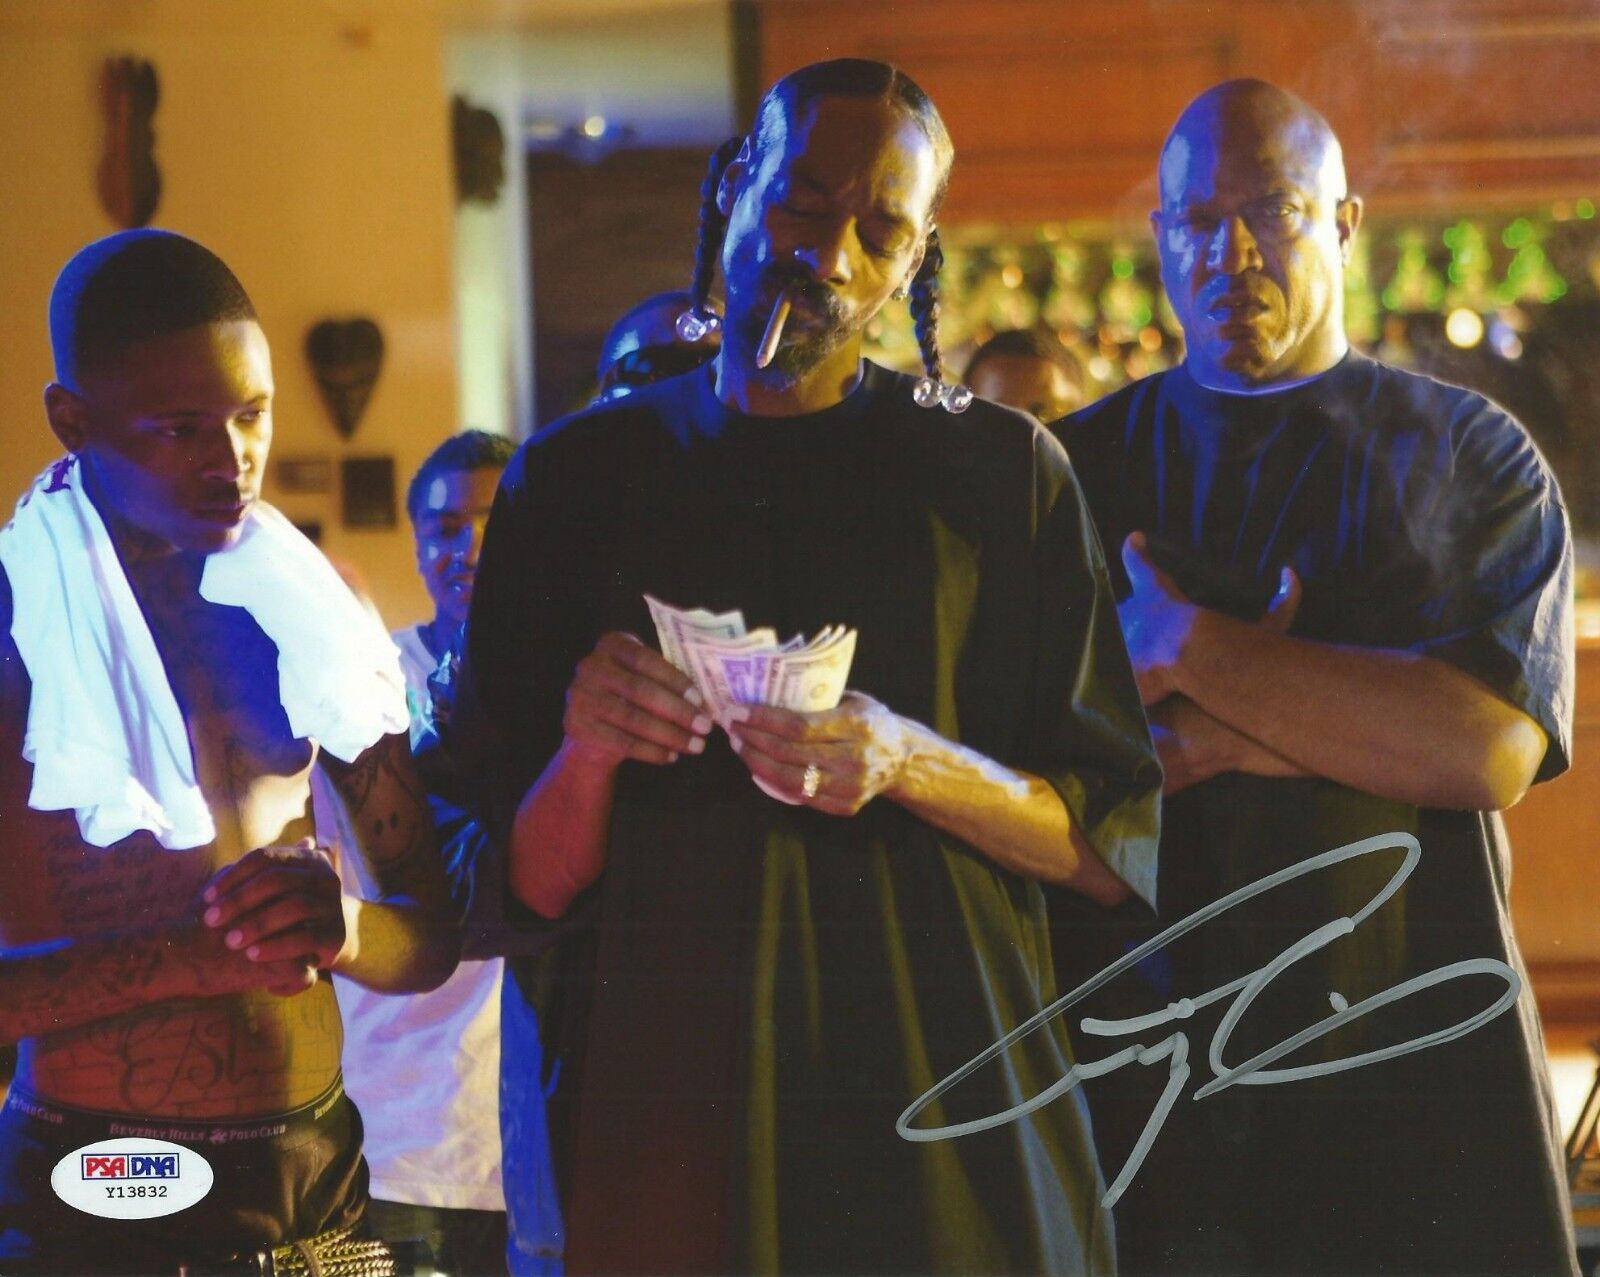 Tiny Lister Signed We The Party 8x10 Photo Poster painting PSA/DNA COA Auto Picture w Snoop Dogg